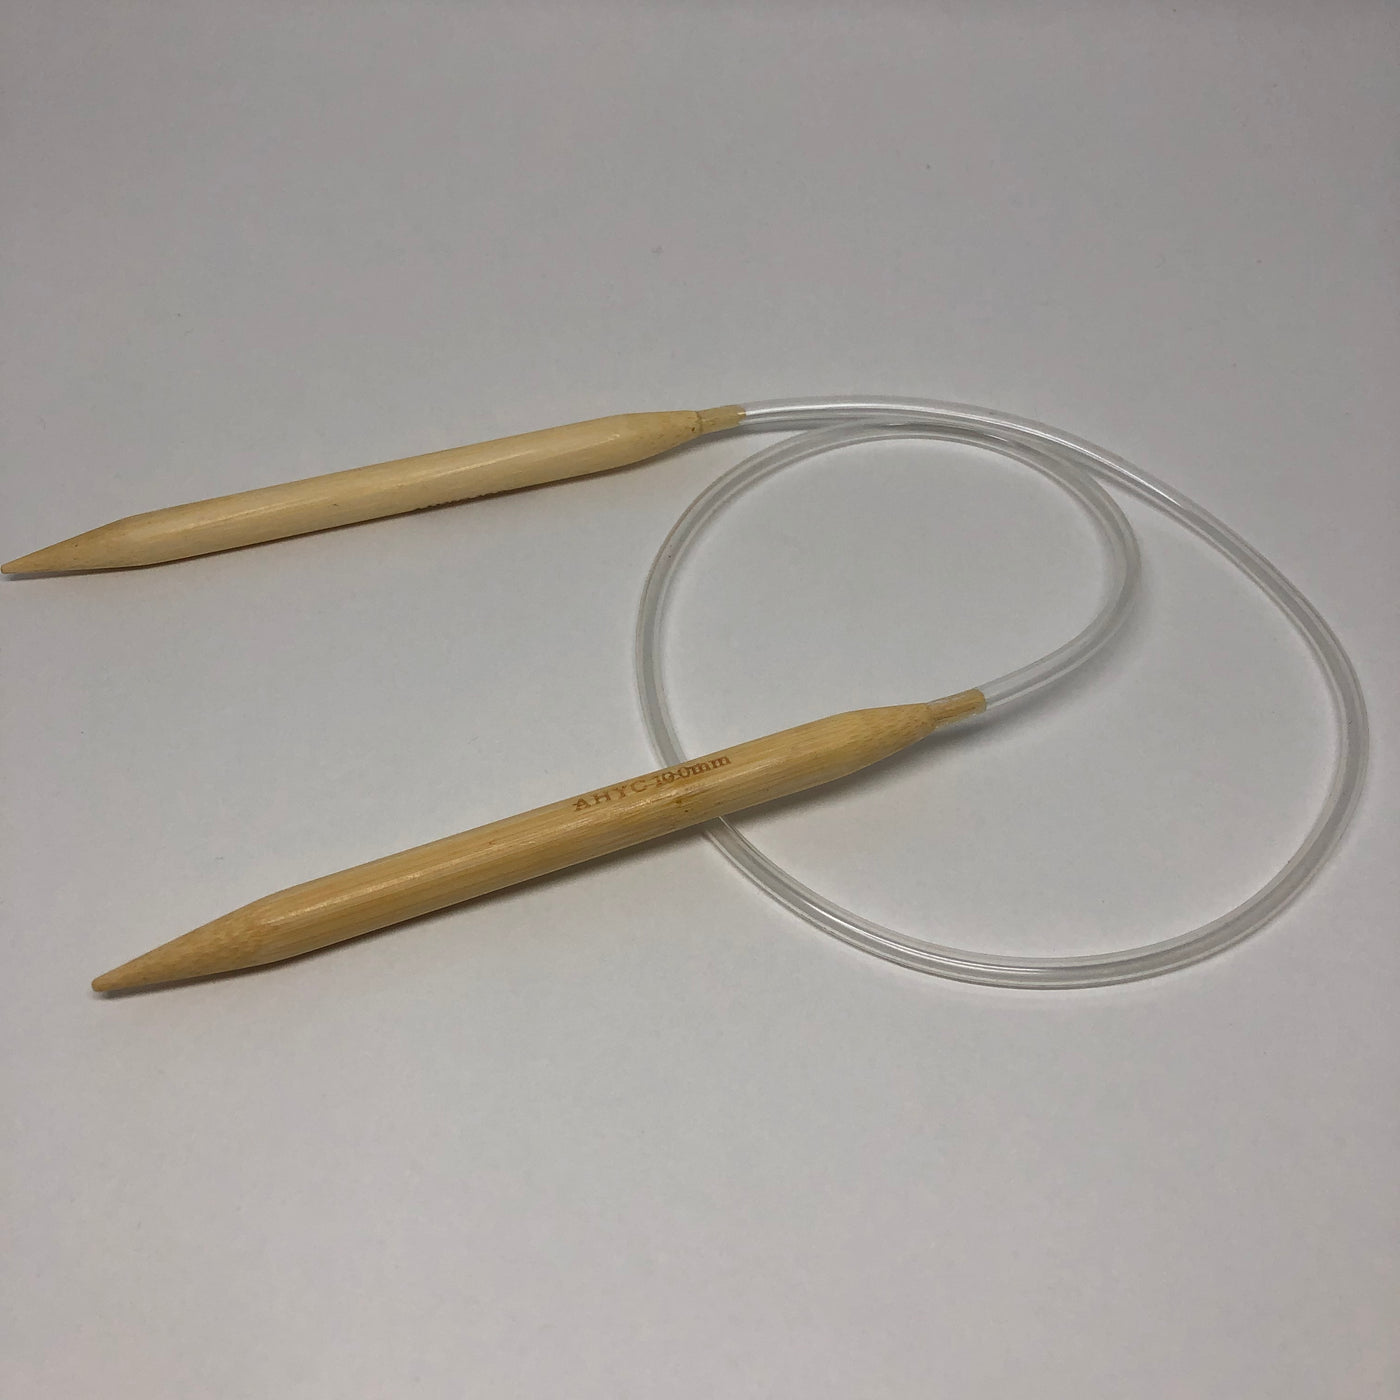 Where can I find bamboo circular knitting needles 10mm